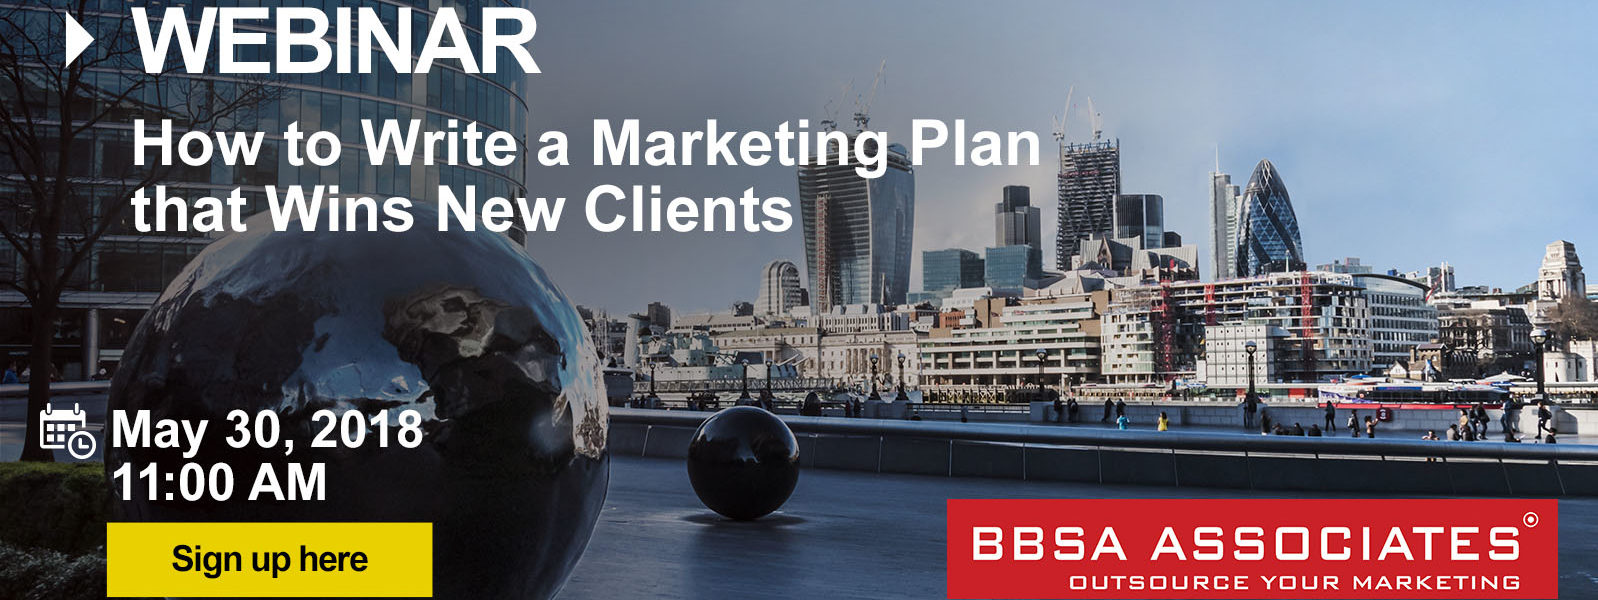 Webinar: How to Write a Marketing Plan That Wins New Clients